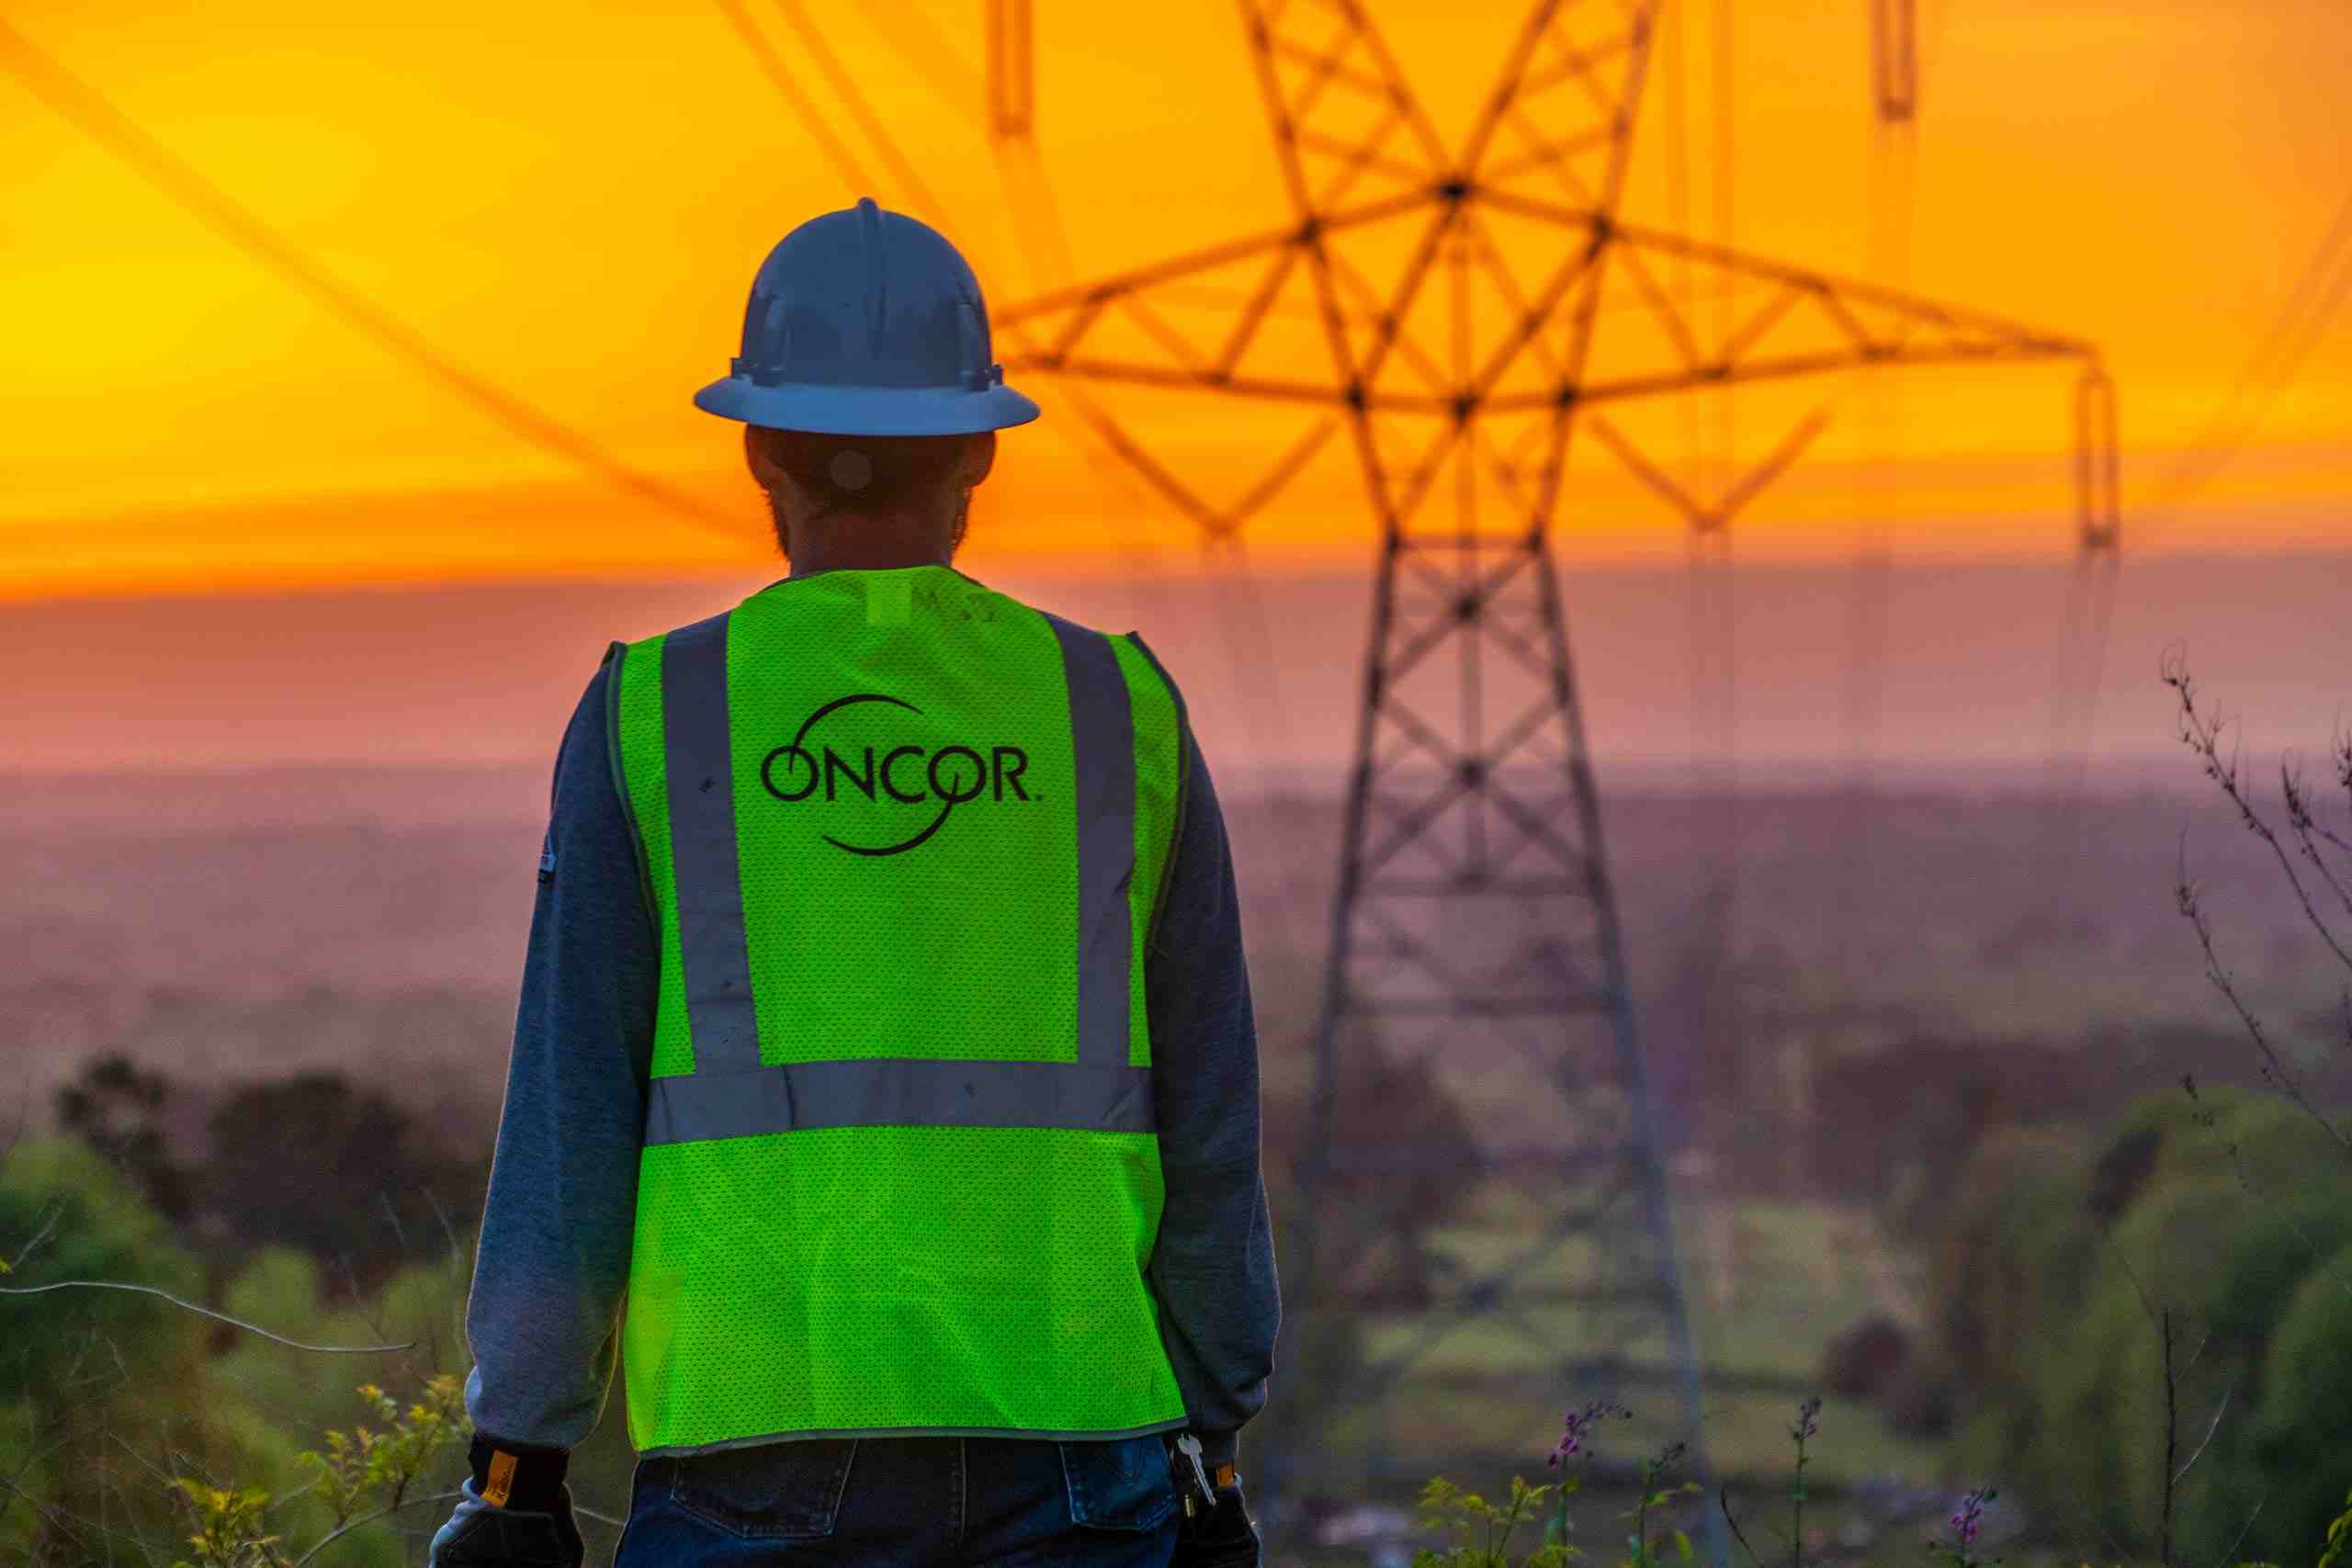 At sunrise Oncor lineman inspecting energy infrastucture 